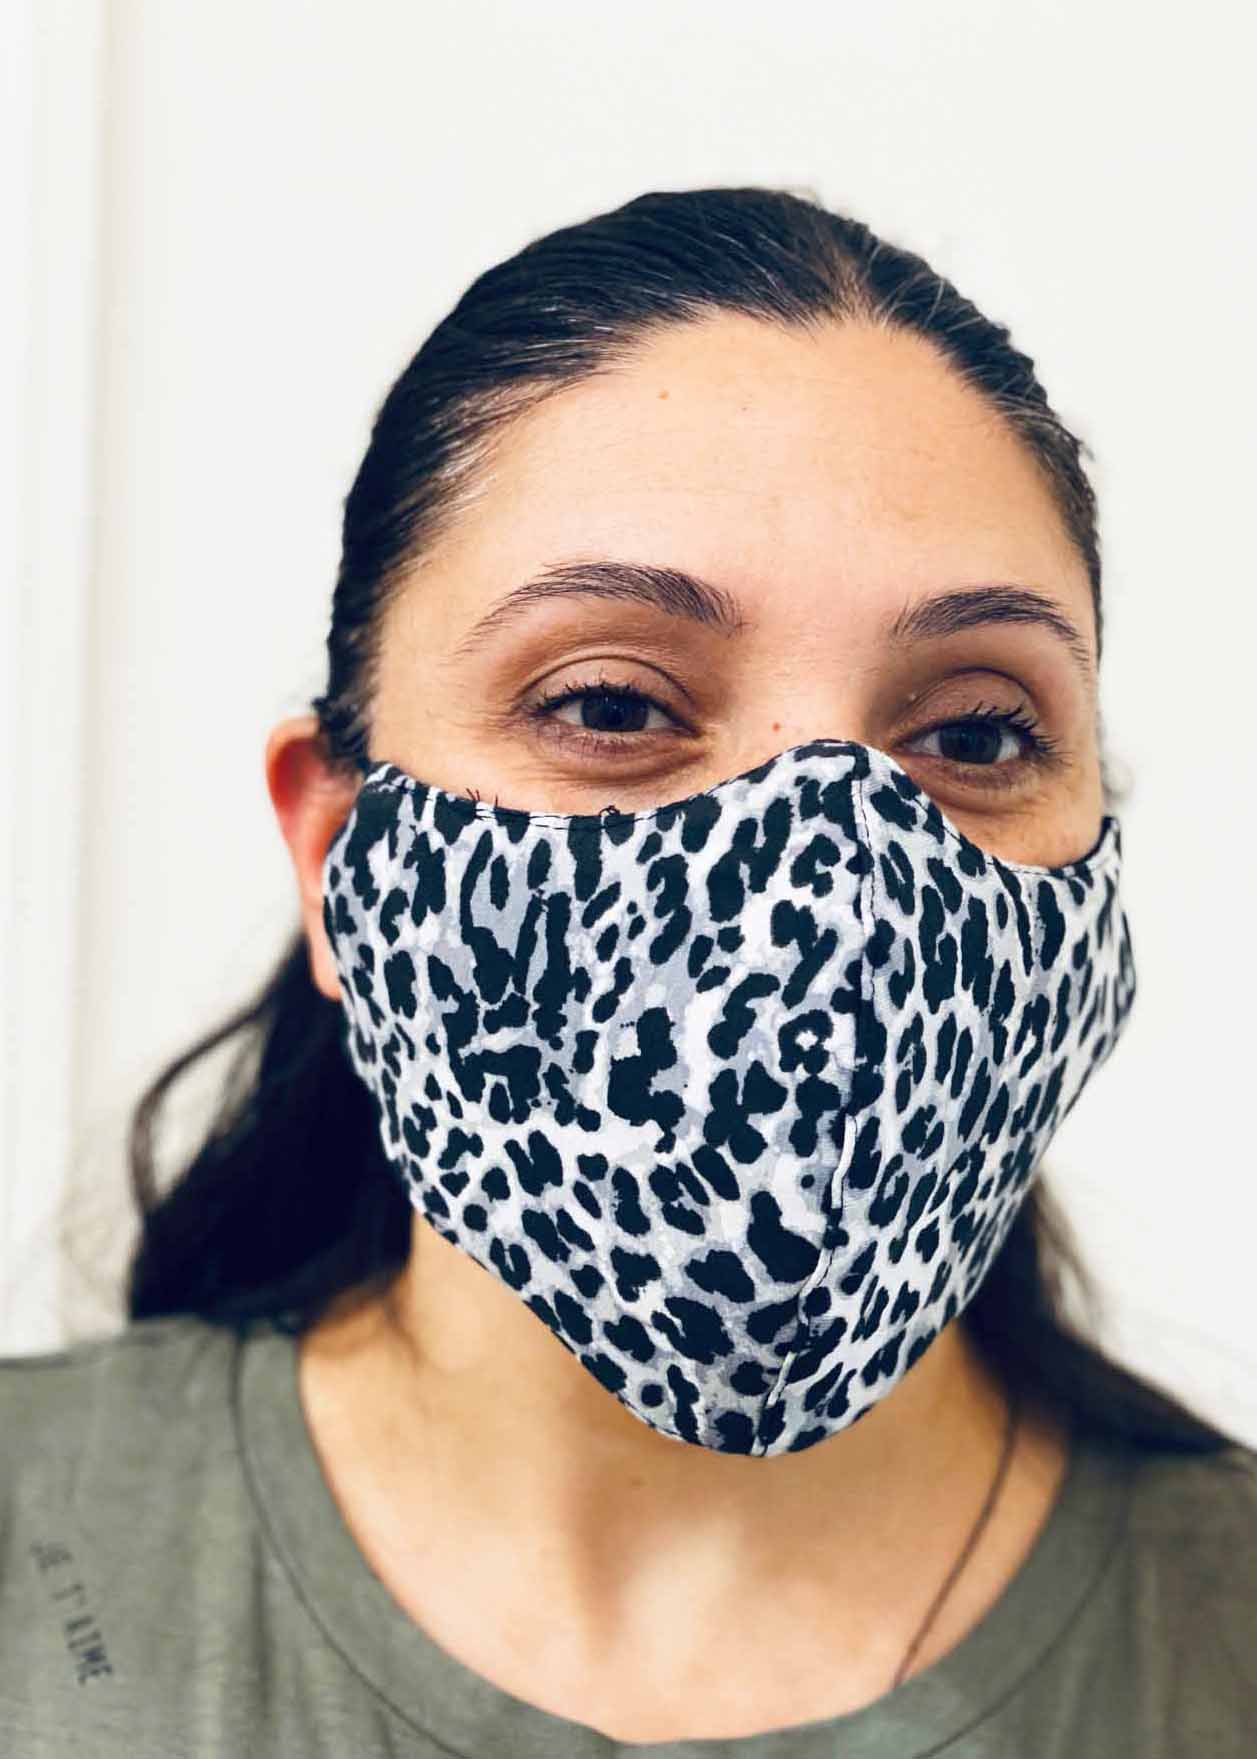 Ladies DHHS Leopard (Grey/White) Face Mask by Laundry Box Melbourne